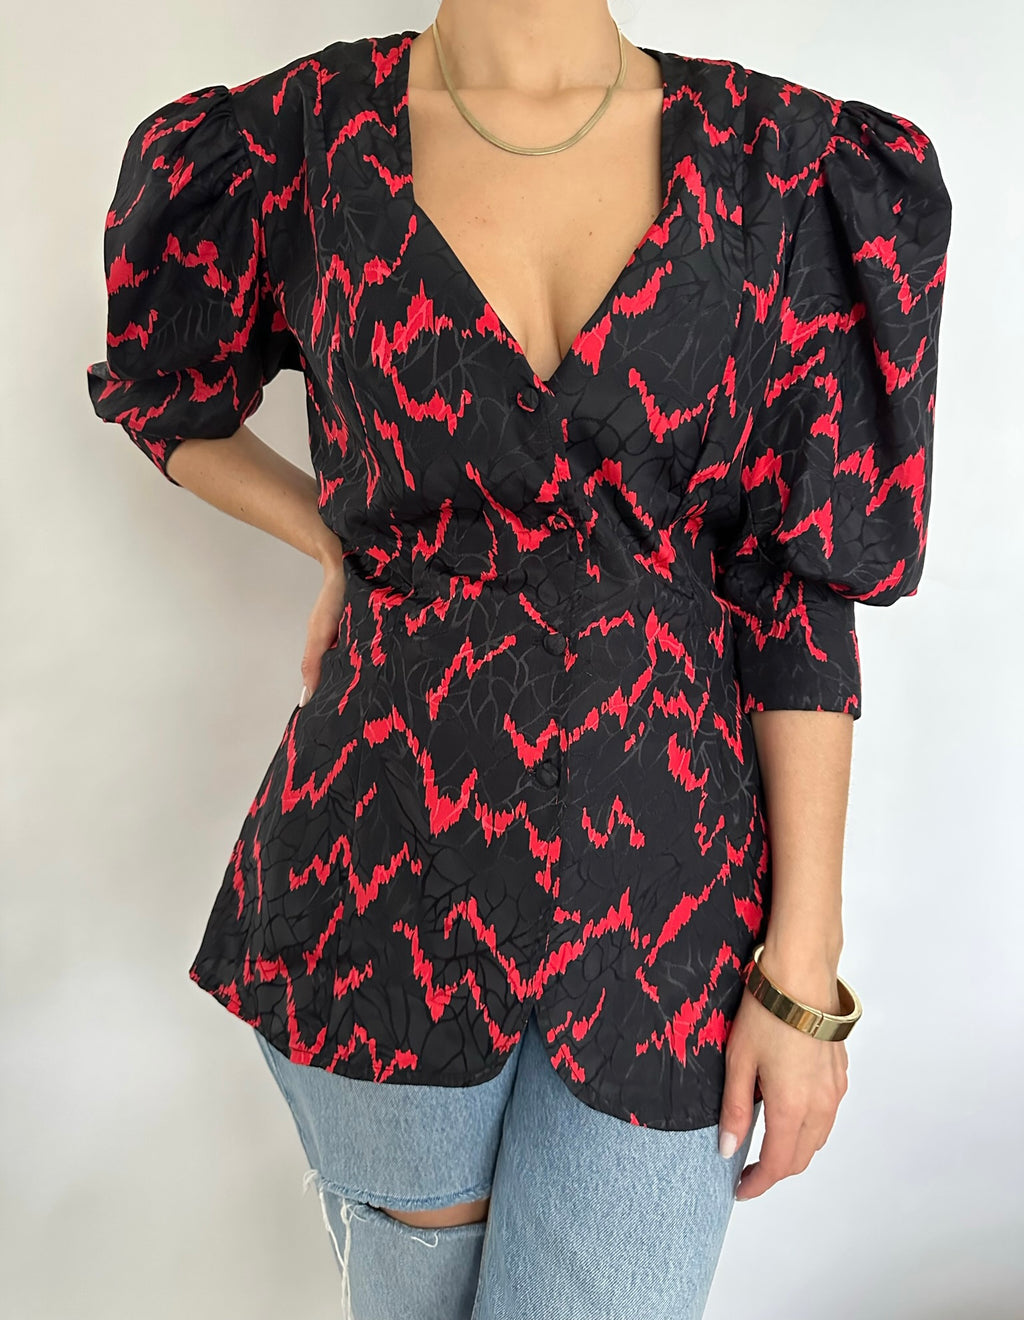 VINTAGE BLACK AND RED PRINTED JACQUARD BUTTON BLOUSE - SIZE M